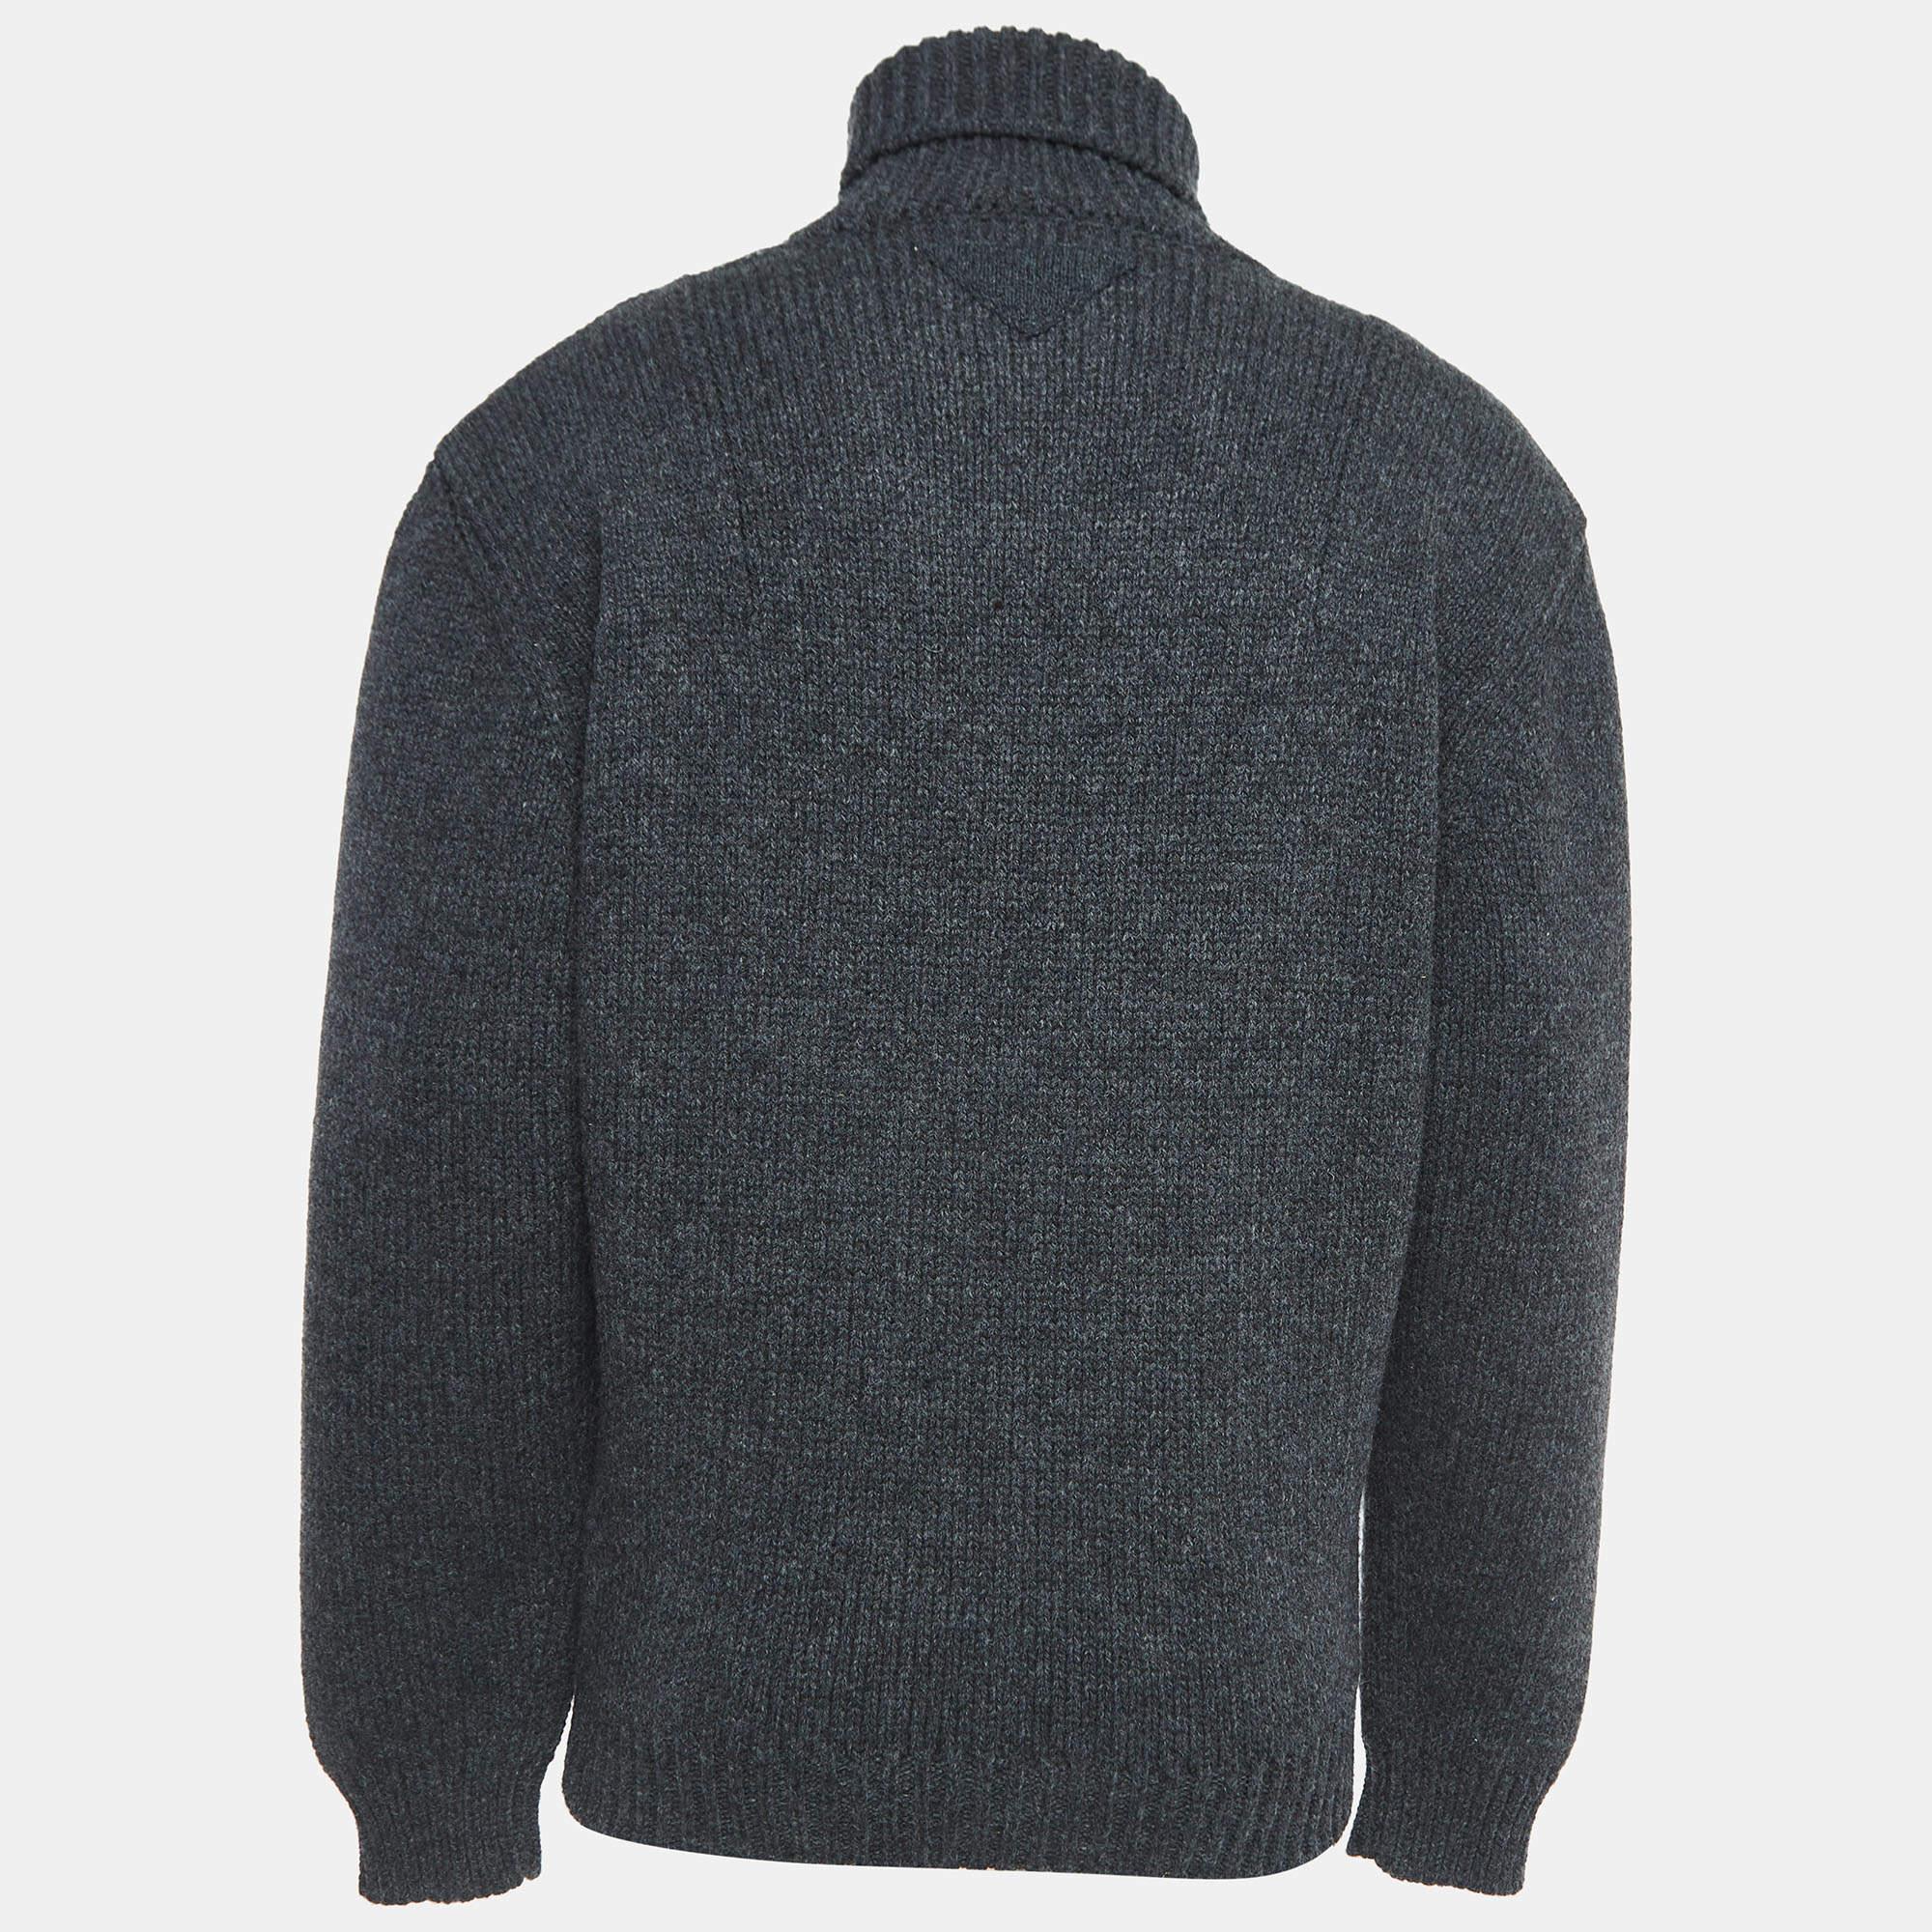 The Prada sweater is a luxurious and versatile wardrobe staple. Crafted from high-quality cotton, it features a sophisticated turtleneck. This timeless piece seamlessly blends comfort with elevated style, making it a must-have for any